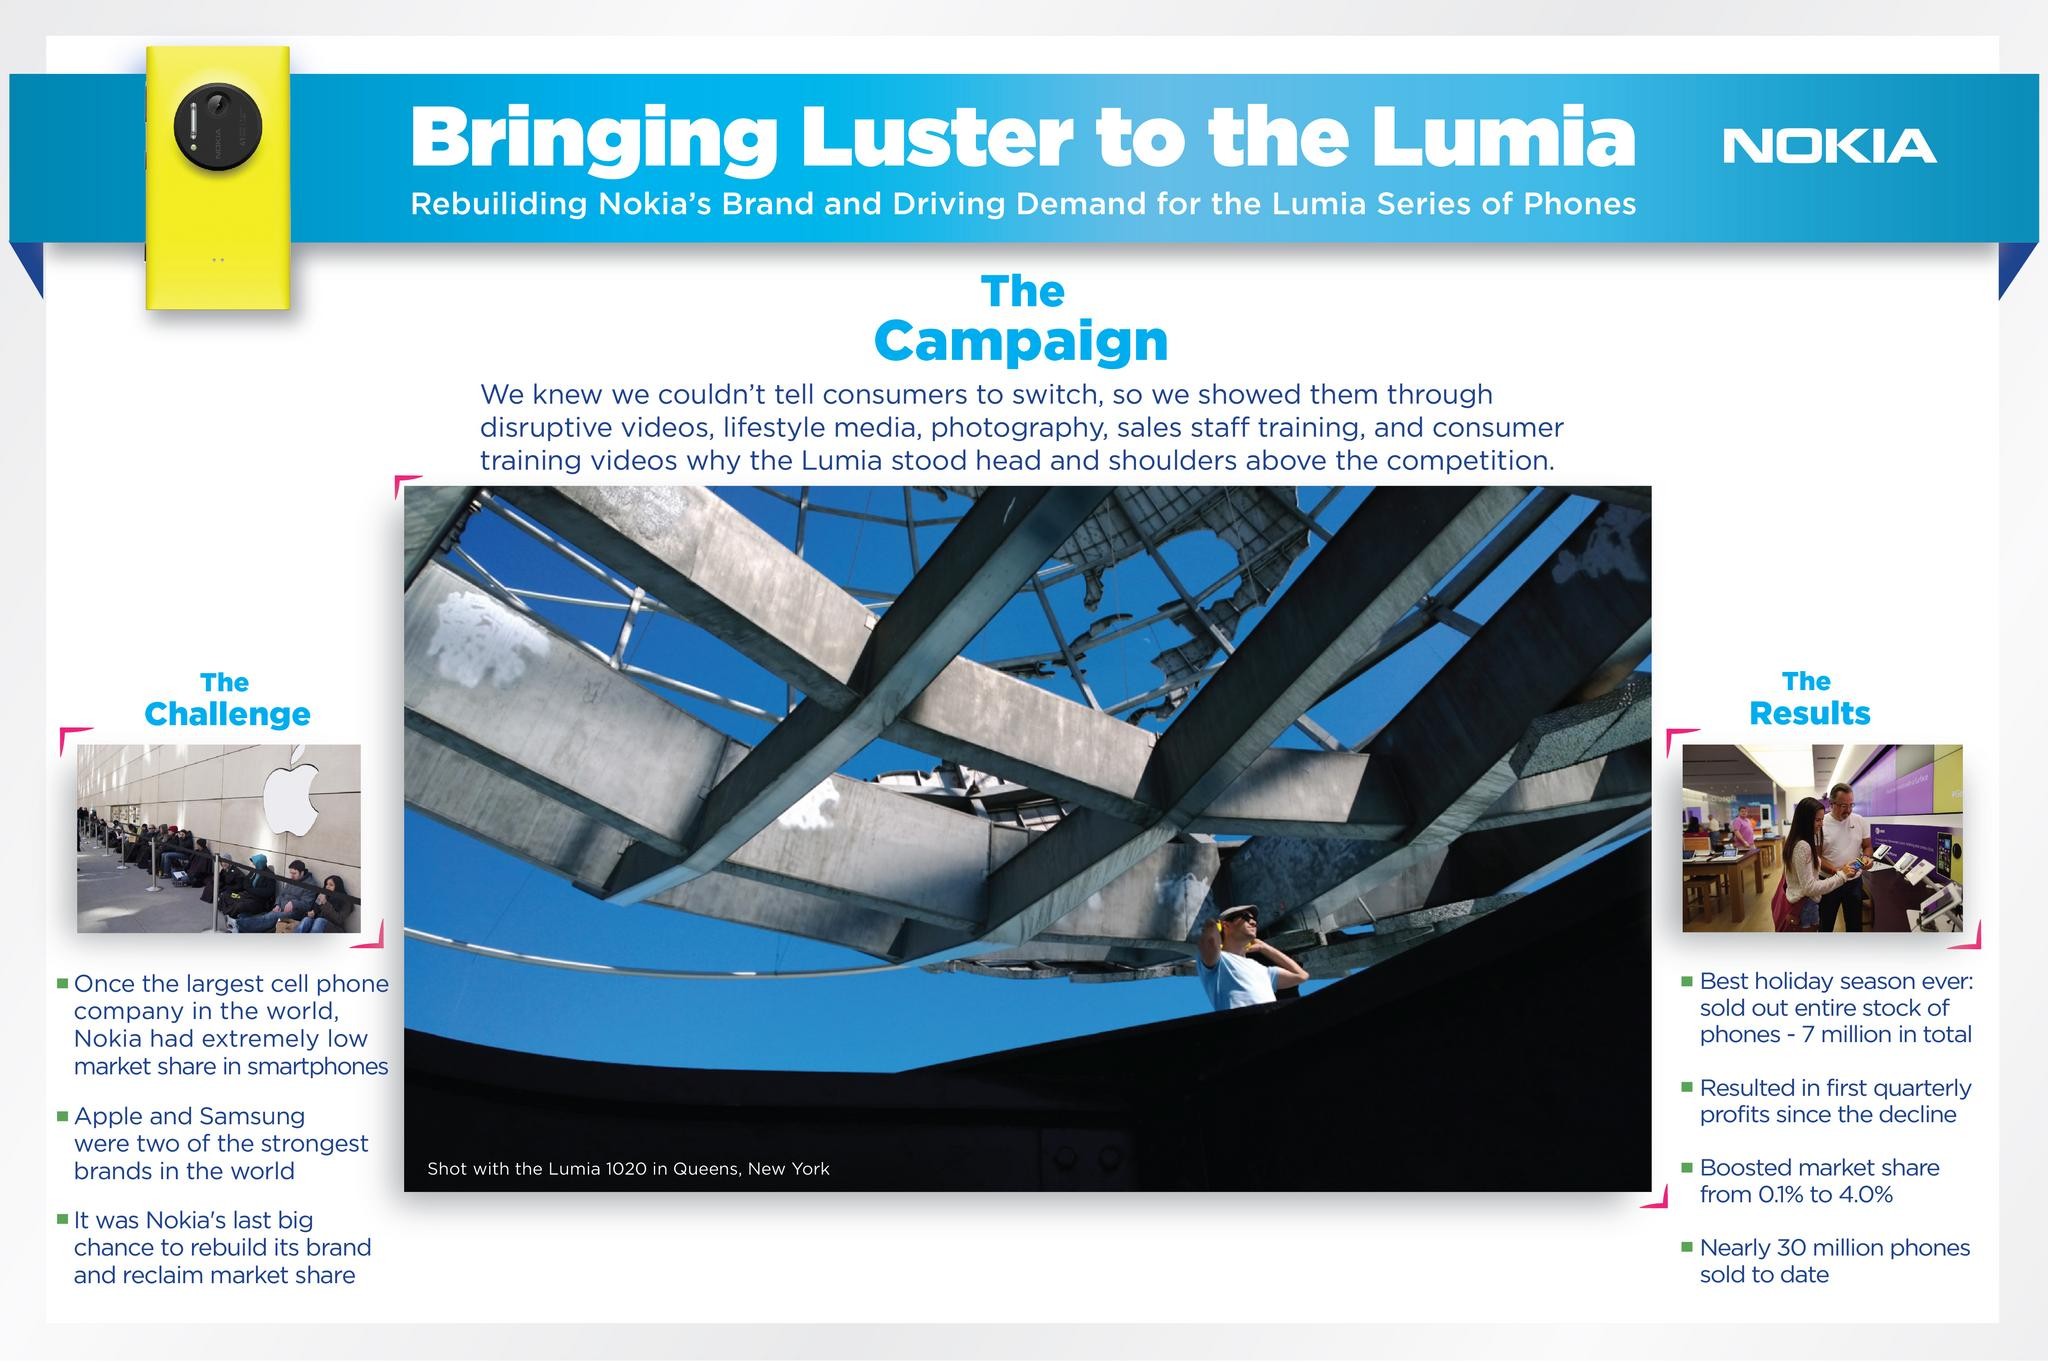 BRINGING LUSTER TO THE LUMIA